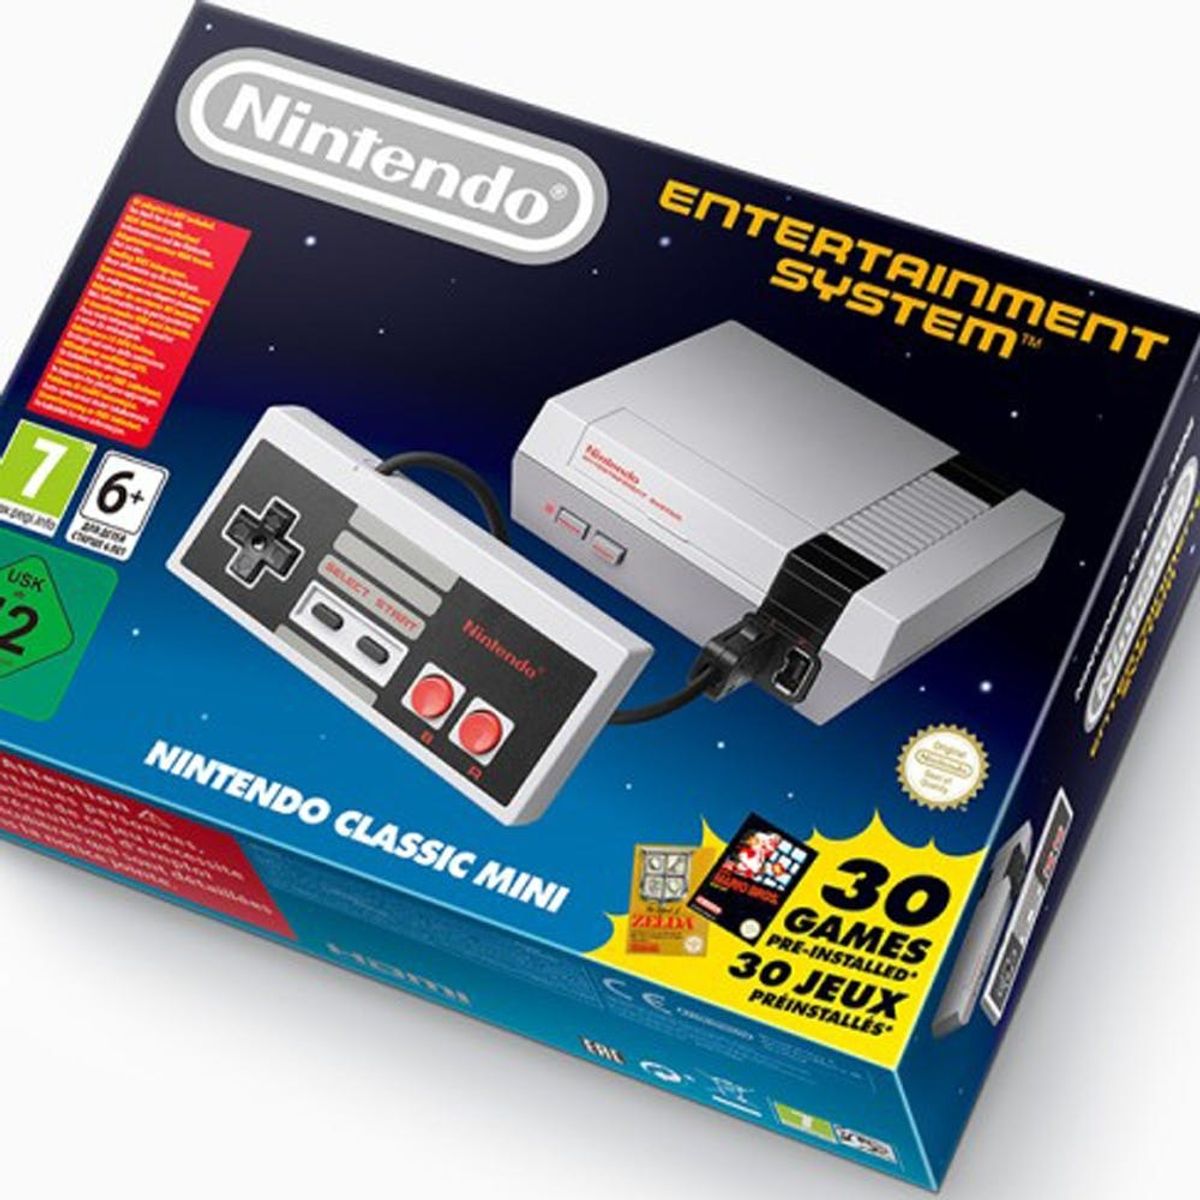 Nintendo Is Kicking It Back With Old School Video Games + Mini NES Console